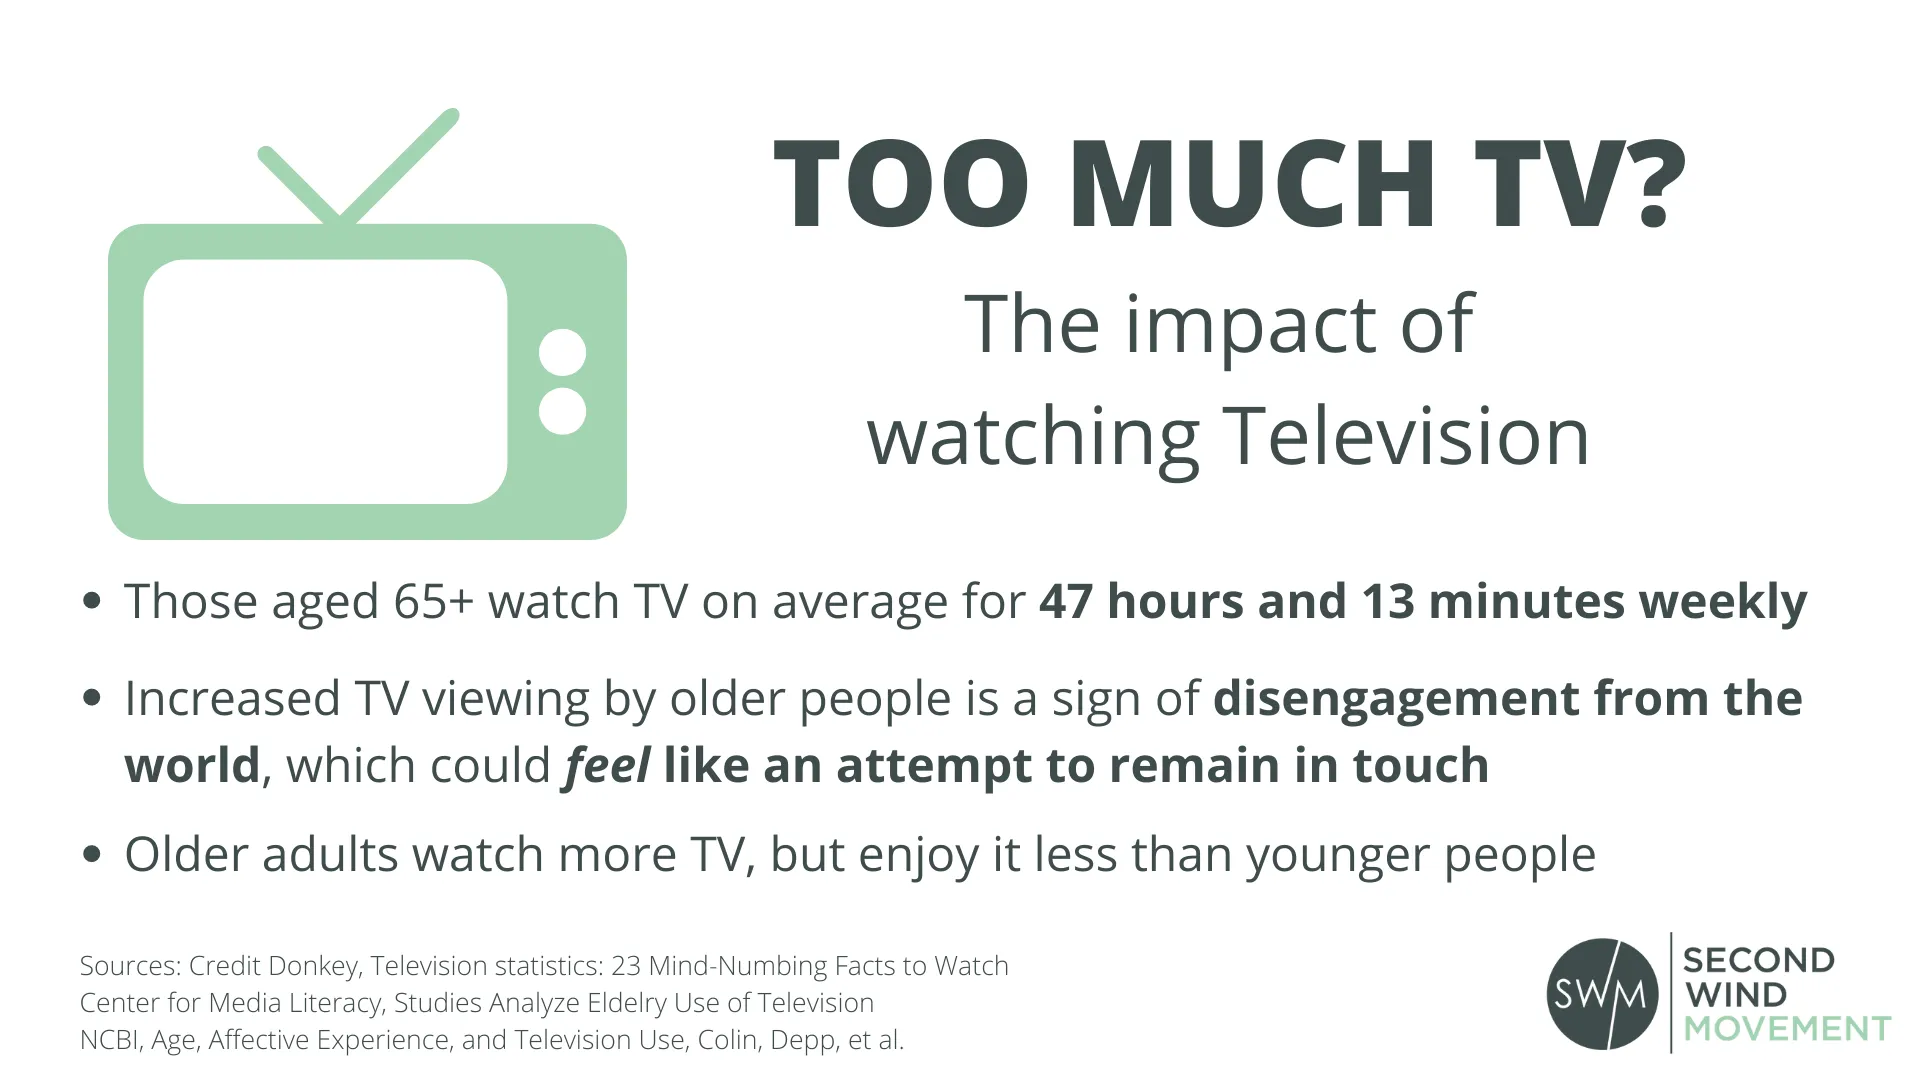 the impact of watching too much